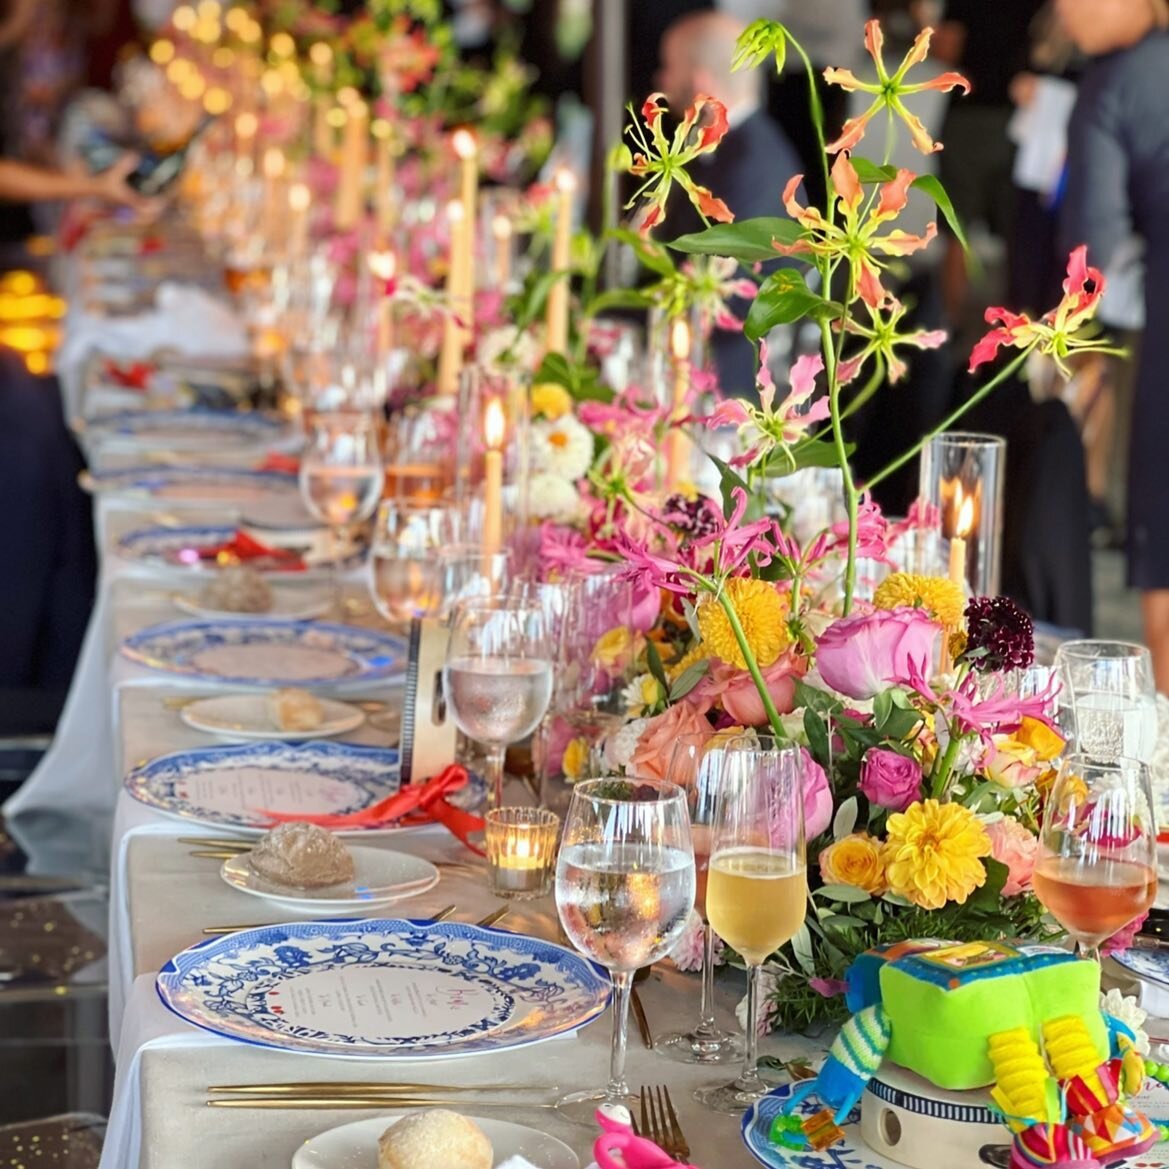 An explosion of colour. That&rsquo;s what we love ❤️ 💙💜💛💚🧡🤍🤎
.
.
.
#livandliv #tablescape #invitations #weddingstationery #weddinginspiration #weddinginvitations #weddinginvites #watercolourinvitations #placenamss